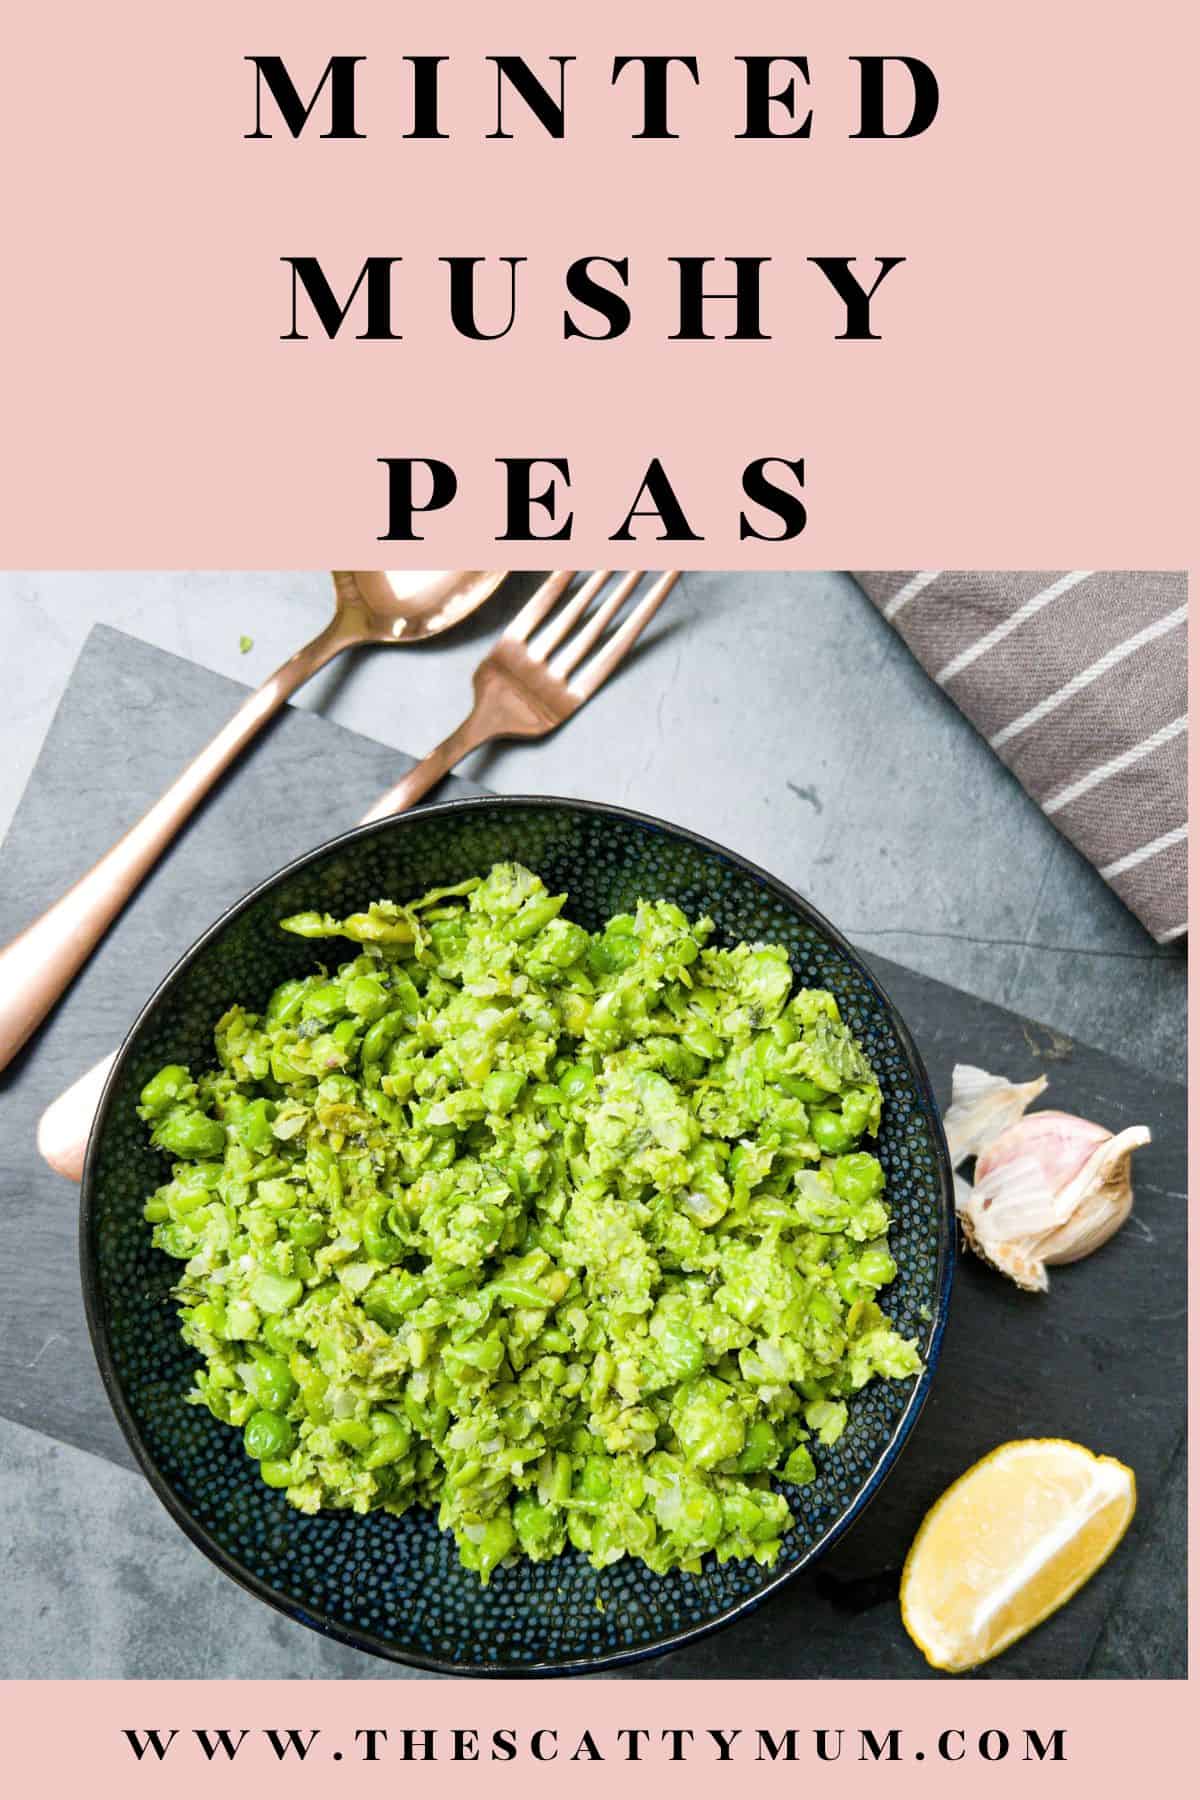 Pinterest image for minted mushy peas.